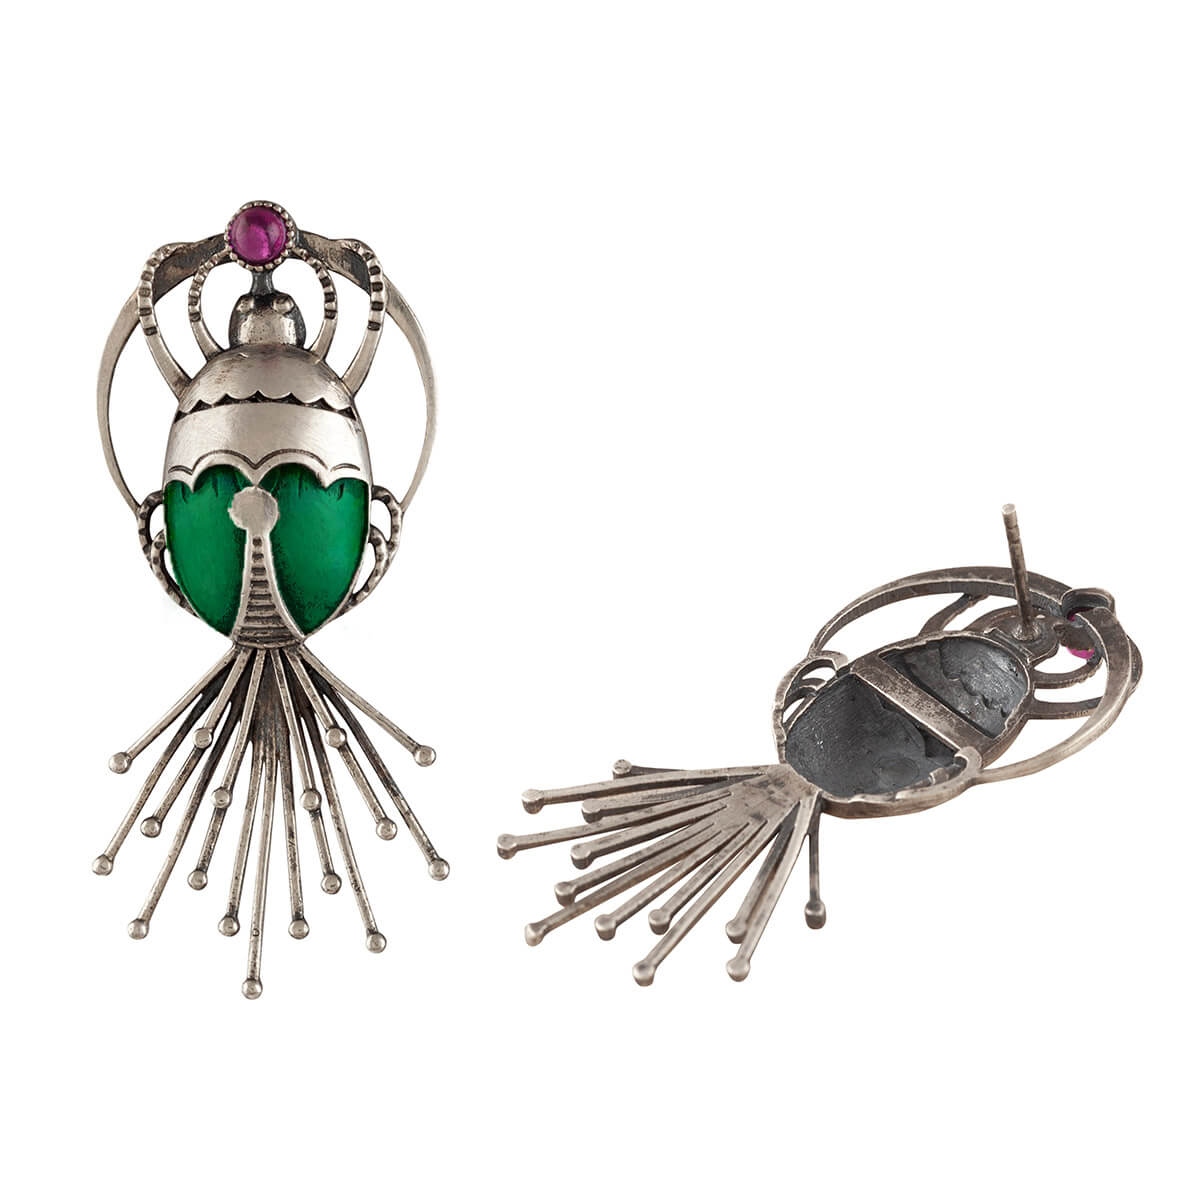 Bhramara Silver Earrings - With Tail